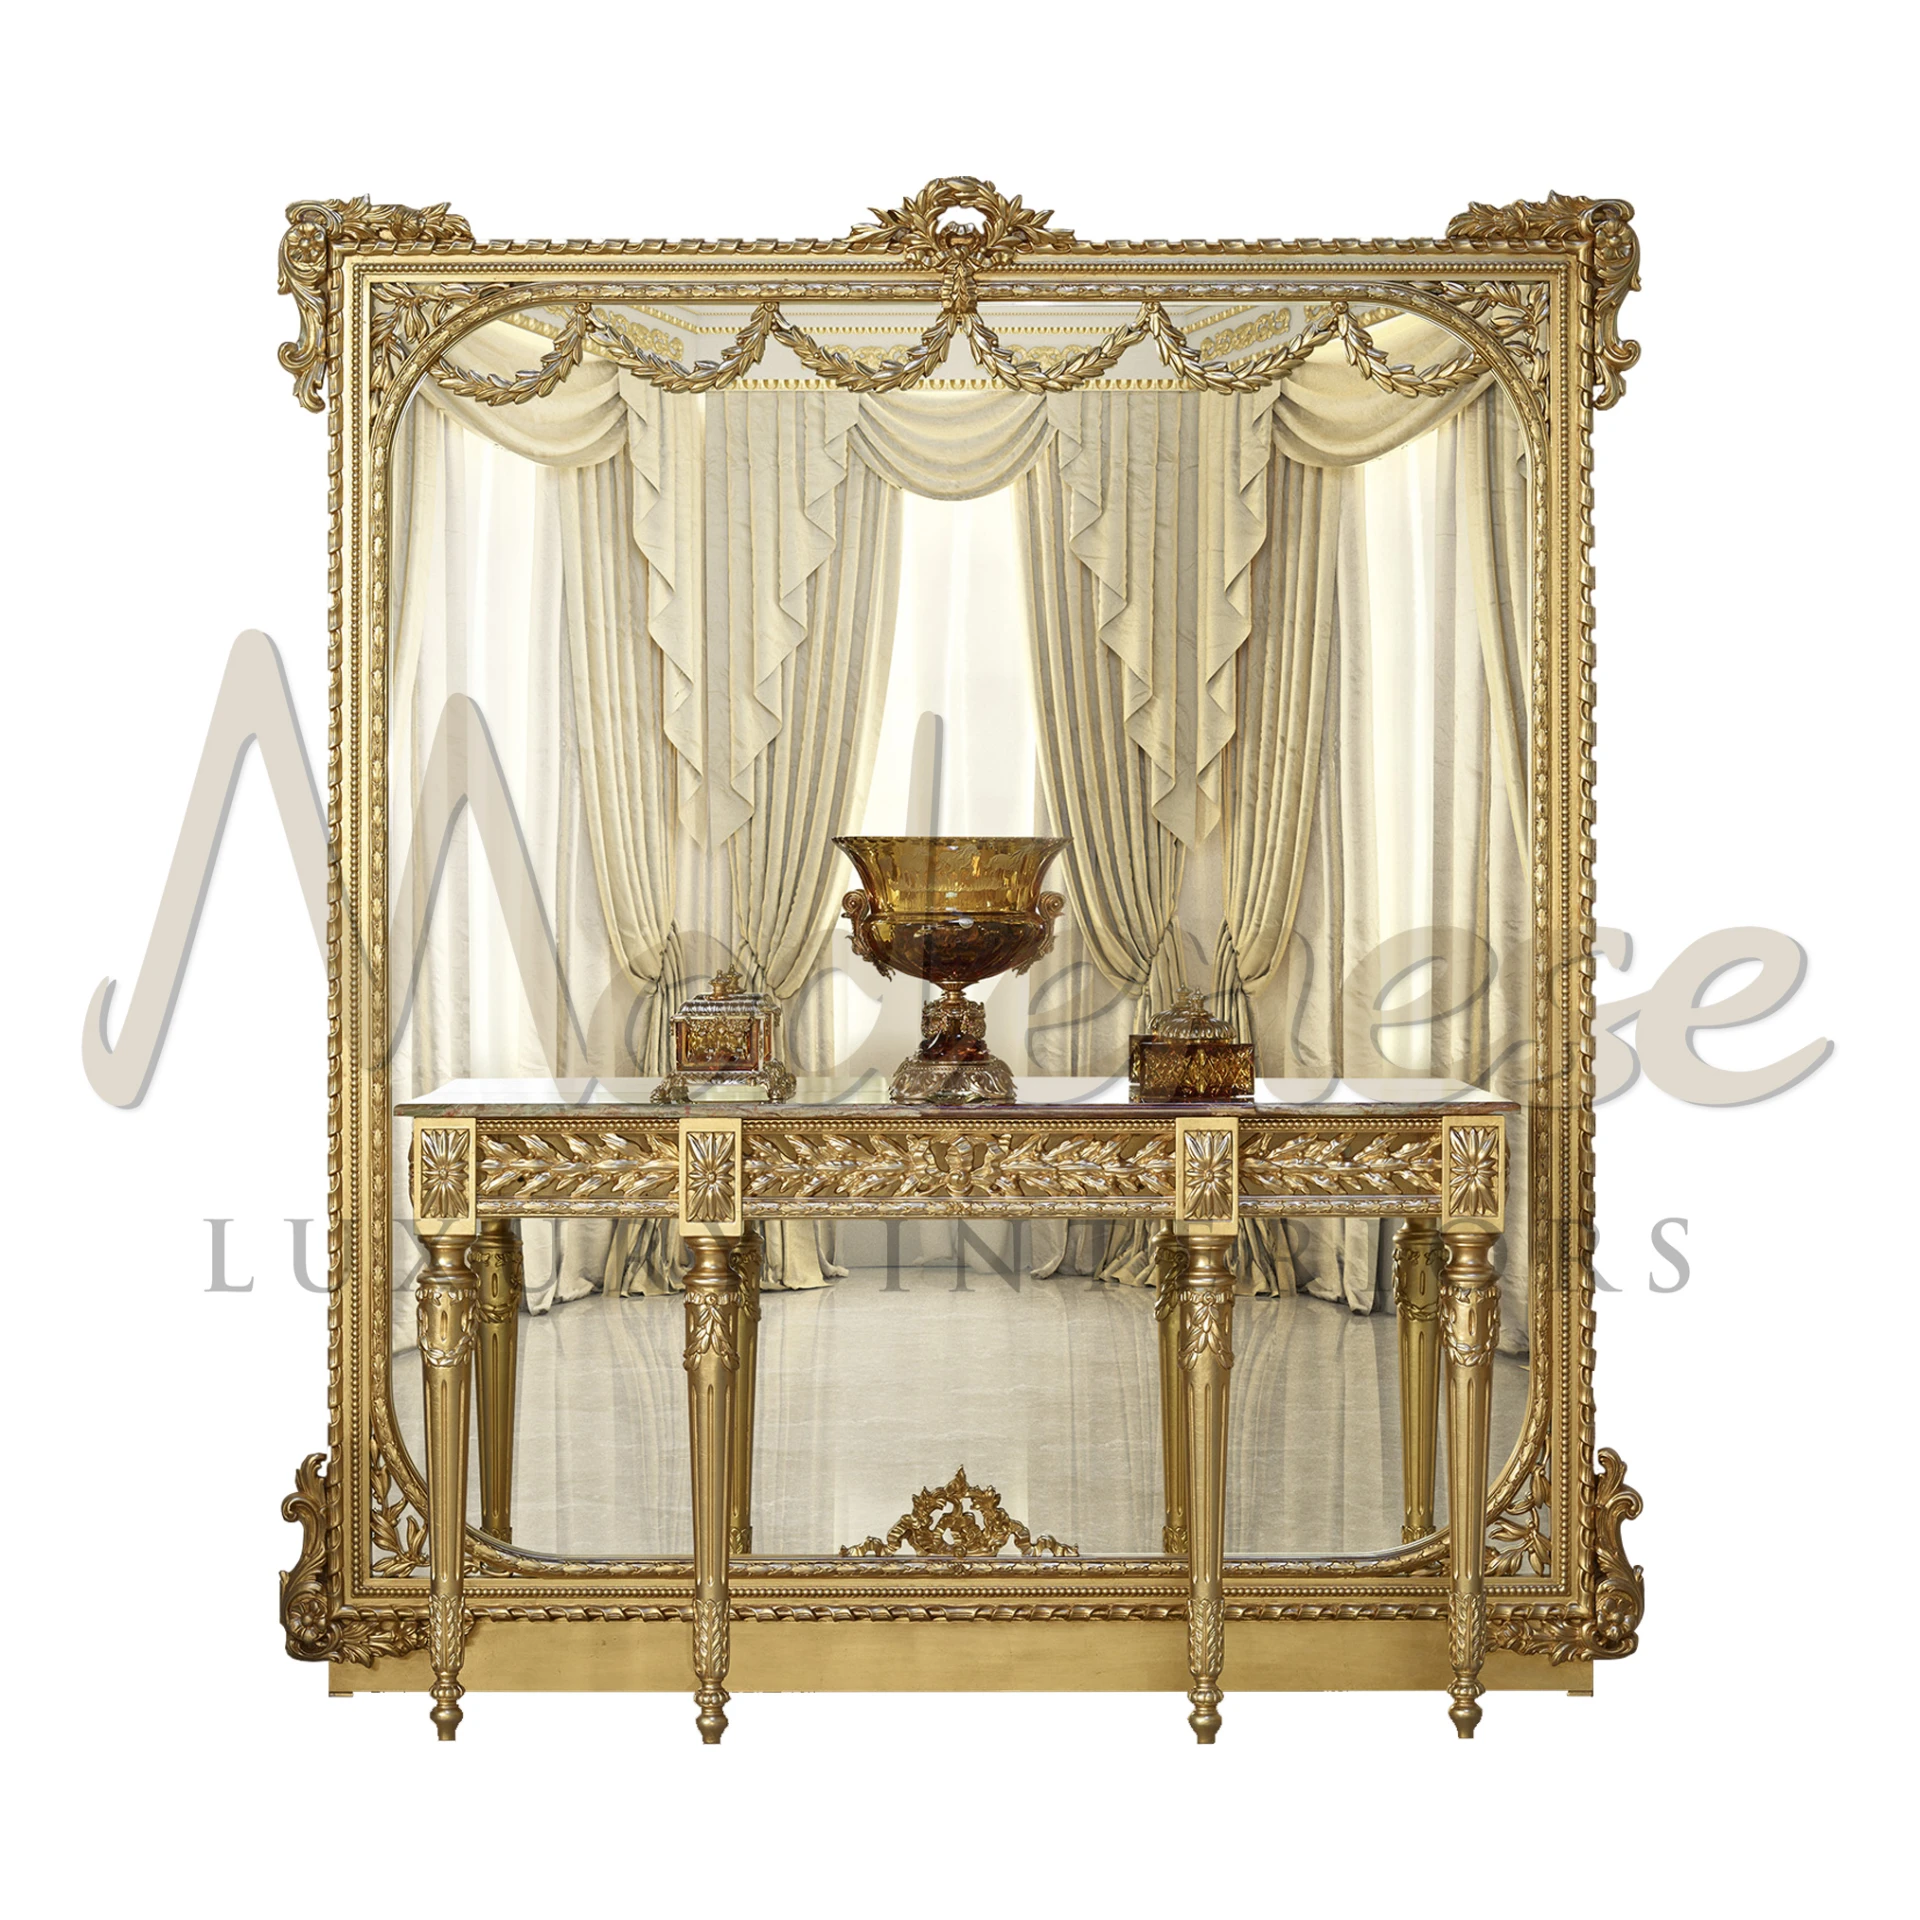 Experience Grandeur: Empire Style Luxury Entrance Console for Classical Villas